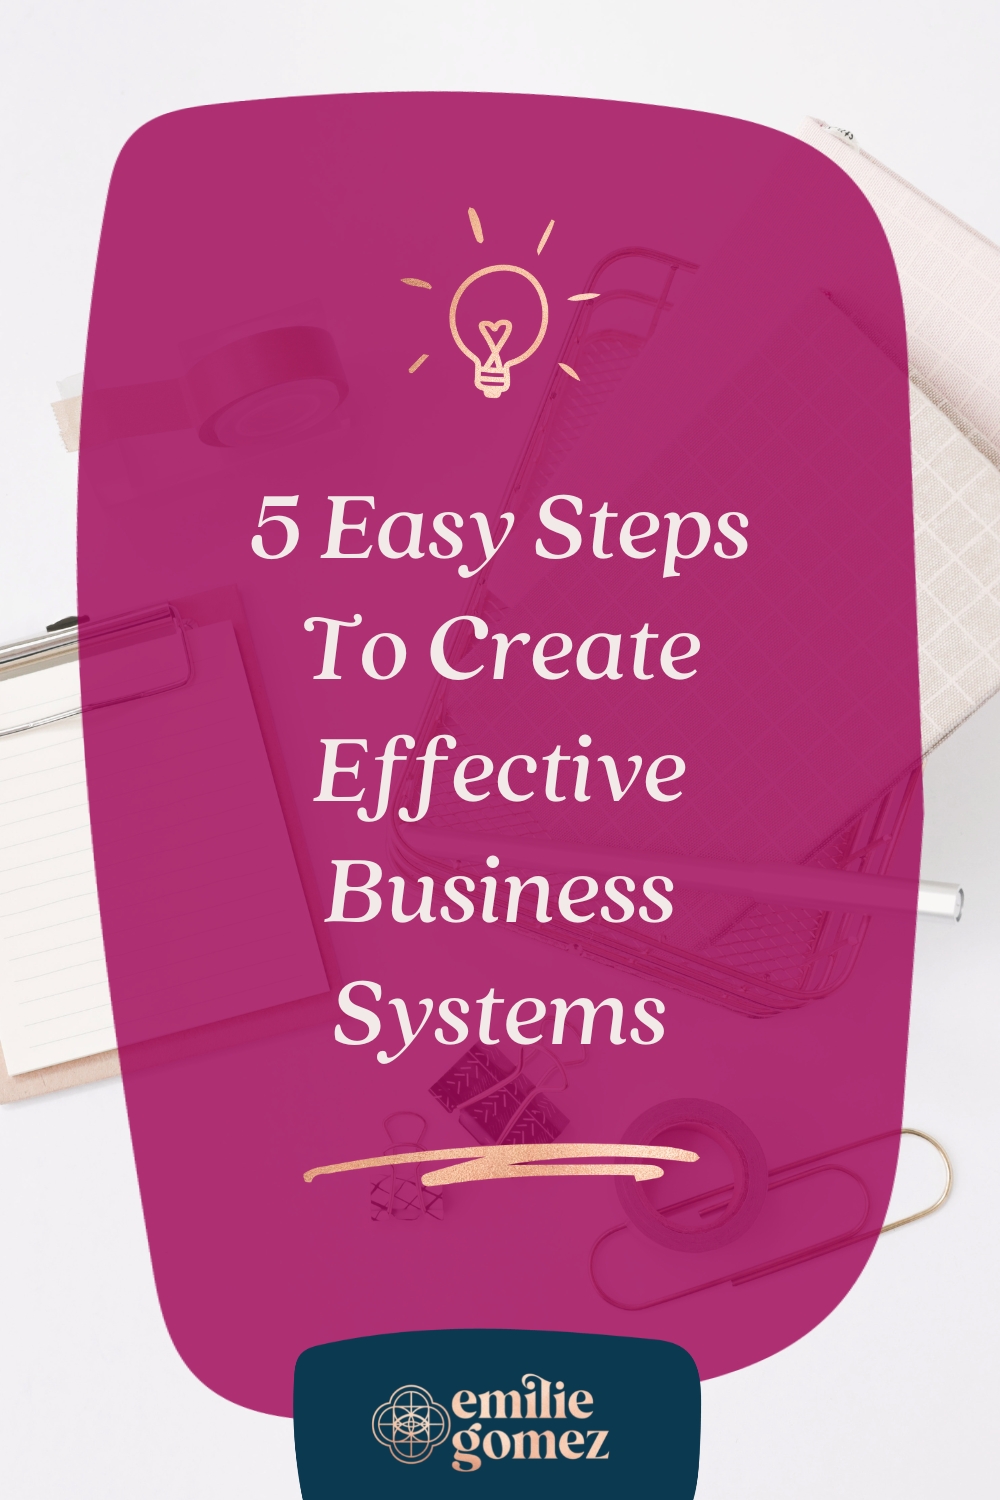 If you're a solopreneur, you know that running a business can be a lot of work. But what if there were a way to make things easier? Business systems can help! By setting up systems and processes, you can free up your time to focus on other aspects of your business. In this post, I’m sharing my easy 5-step hierarchy to create systems in your online business. Click through to learn more!